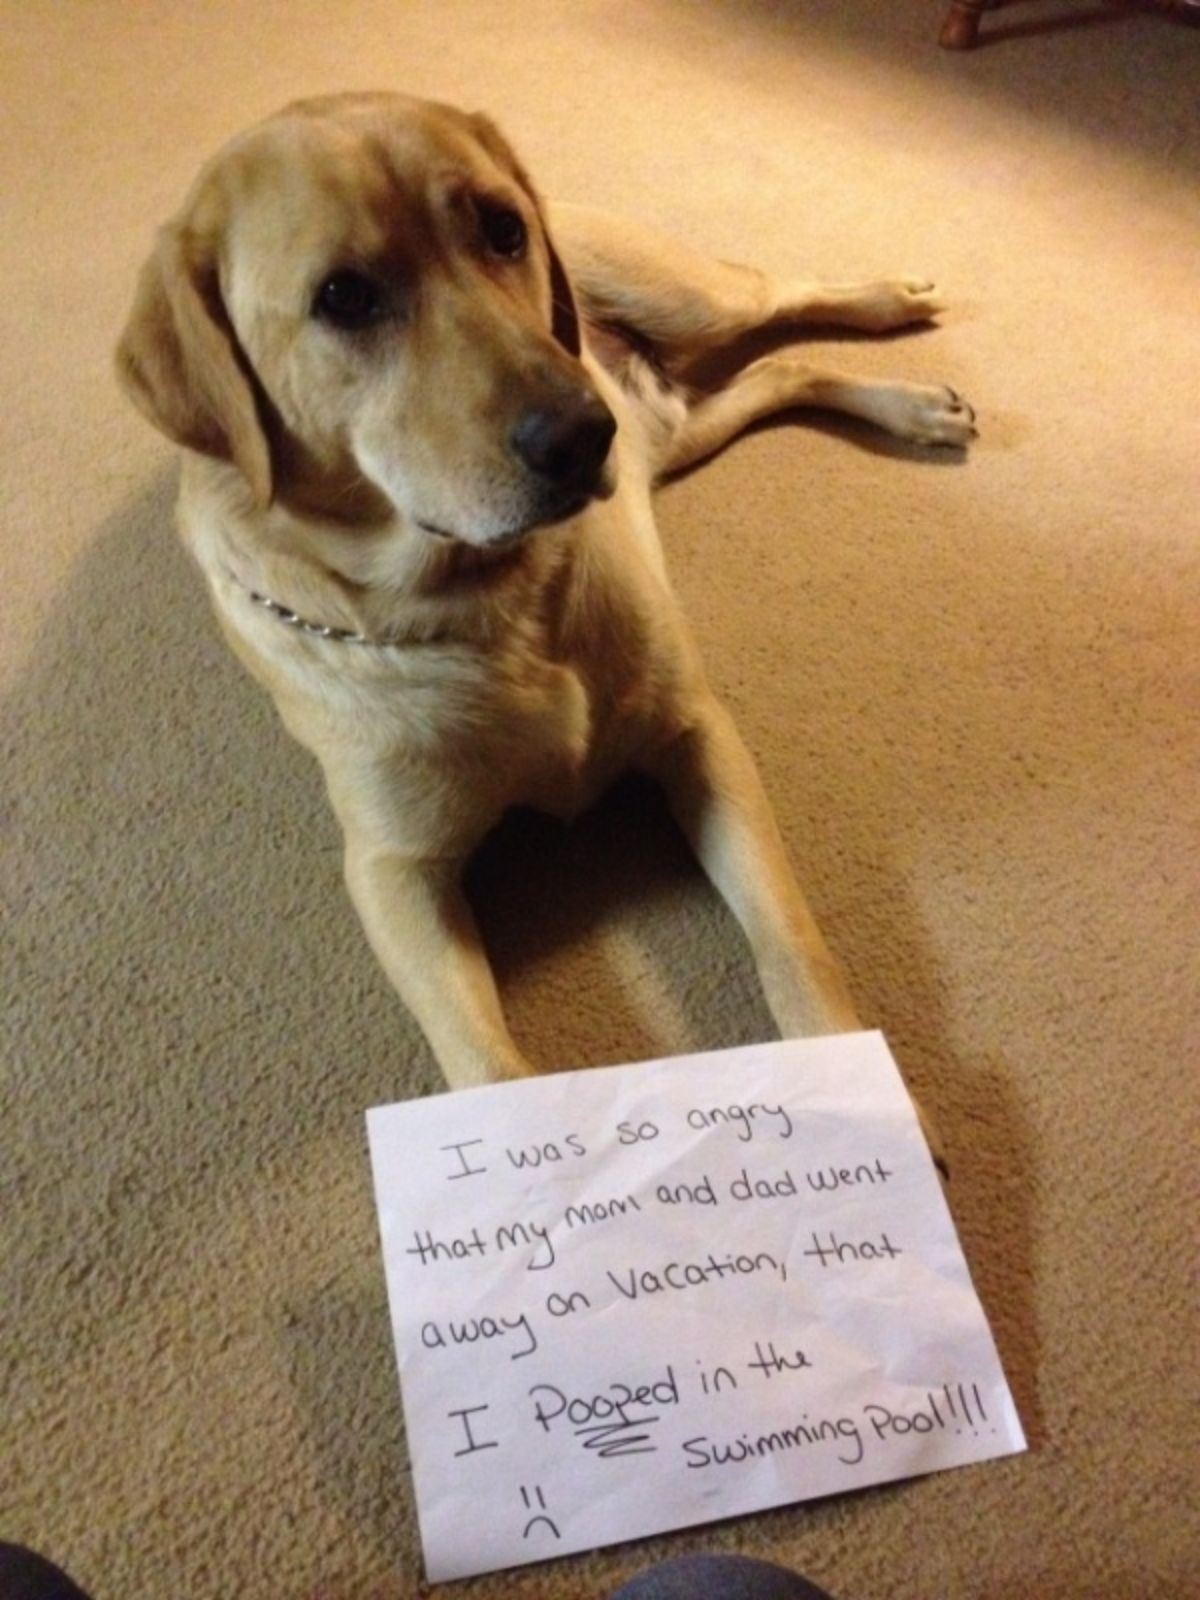 yellow labrador retriever with a sign saying it got angry that parents went on vacation so pooped in the swimming pool